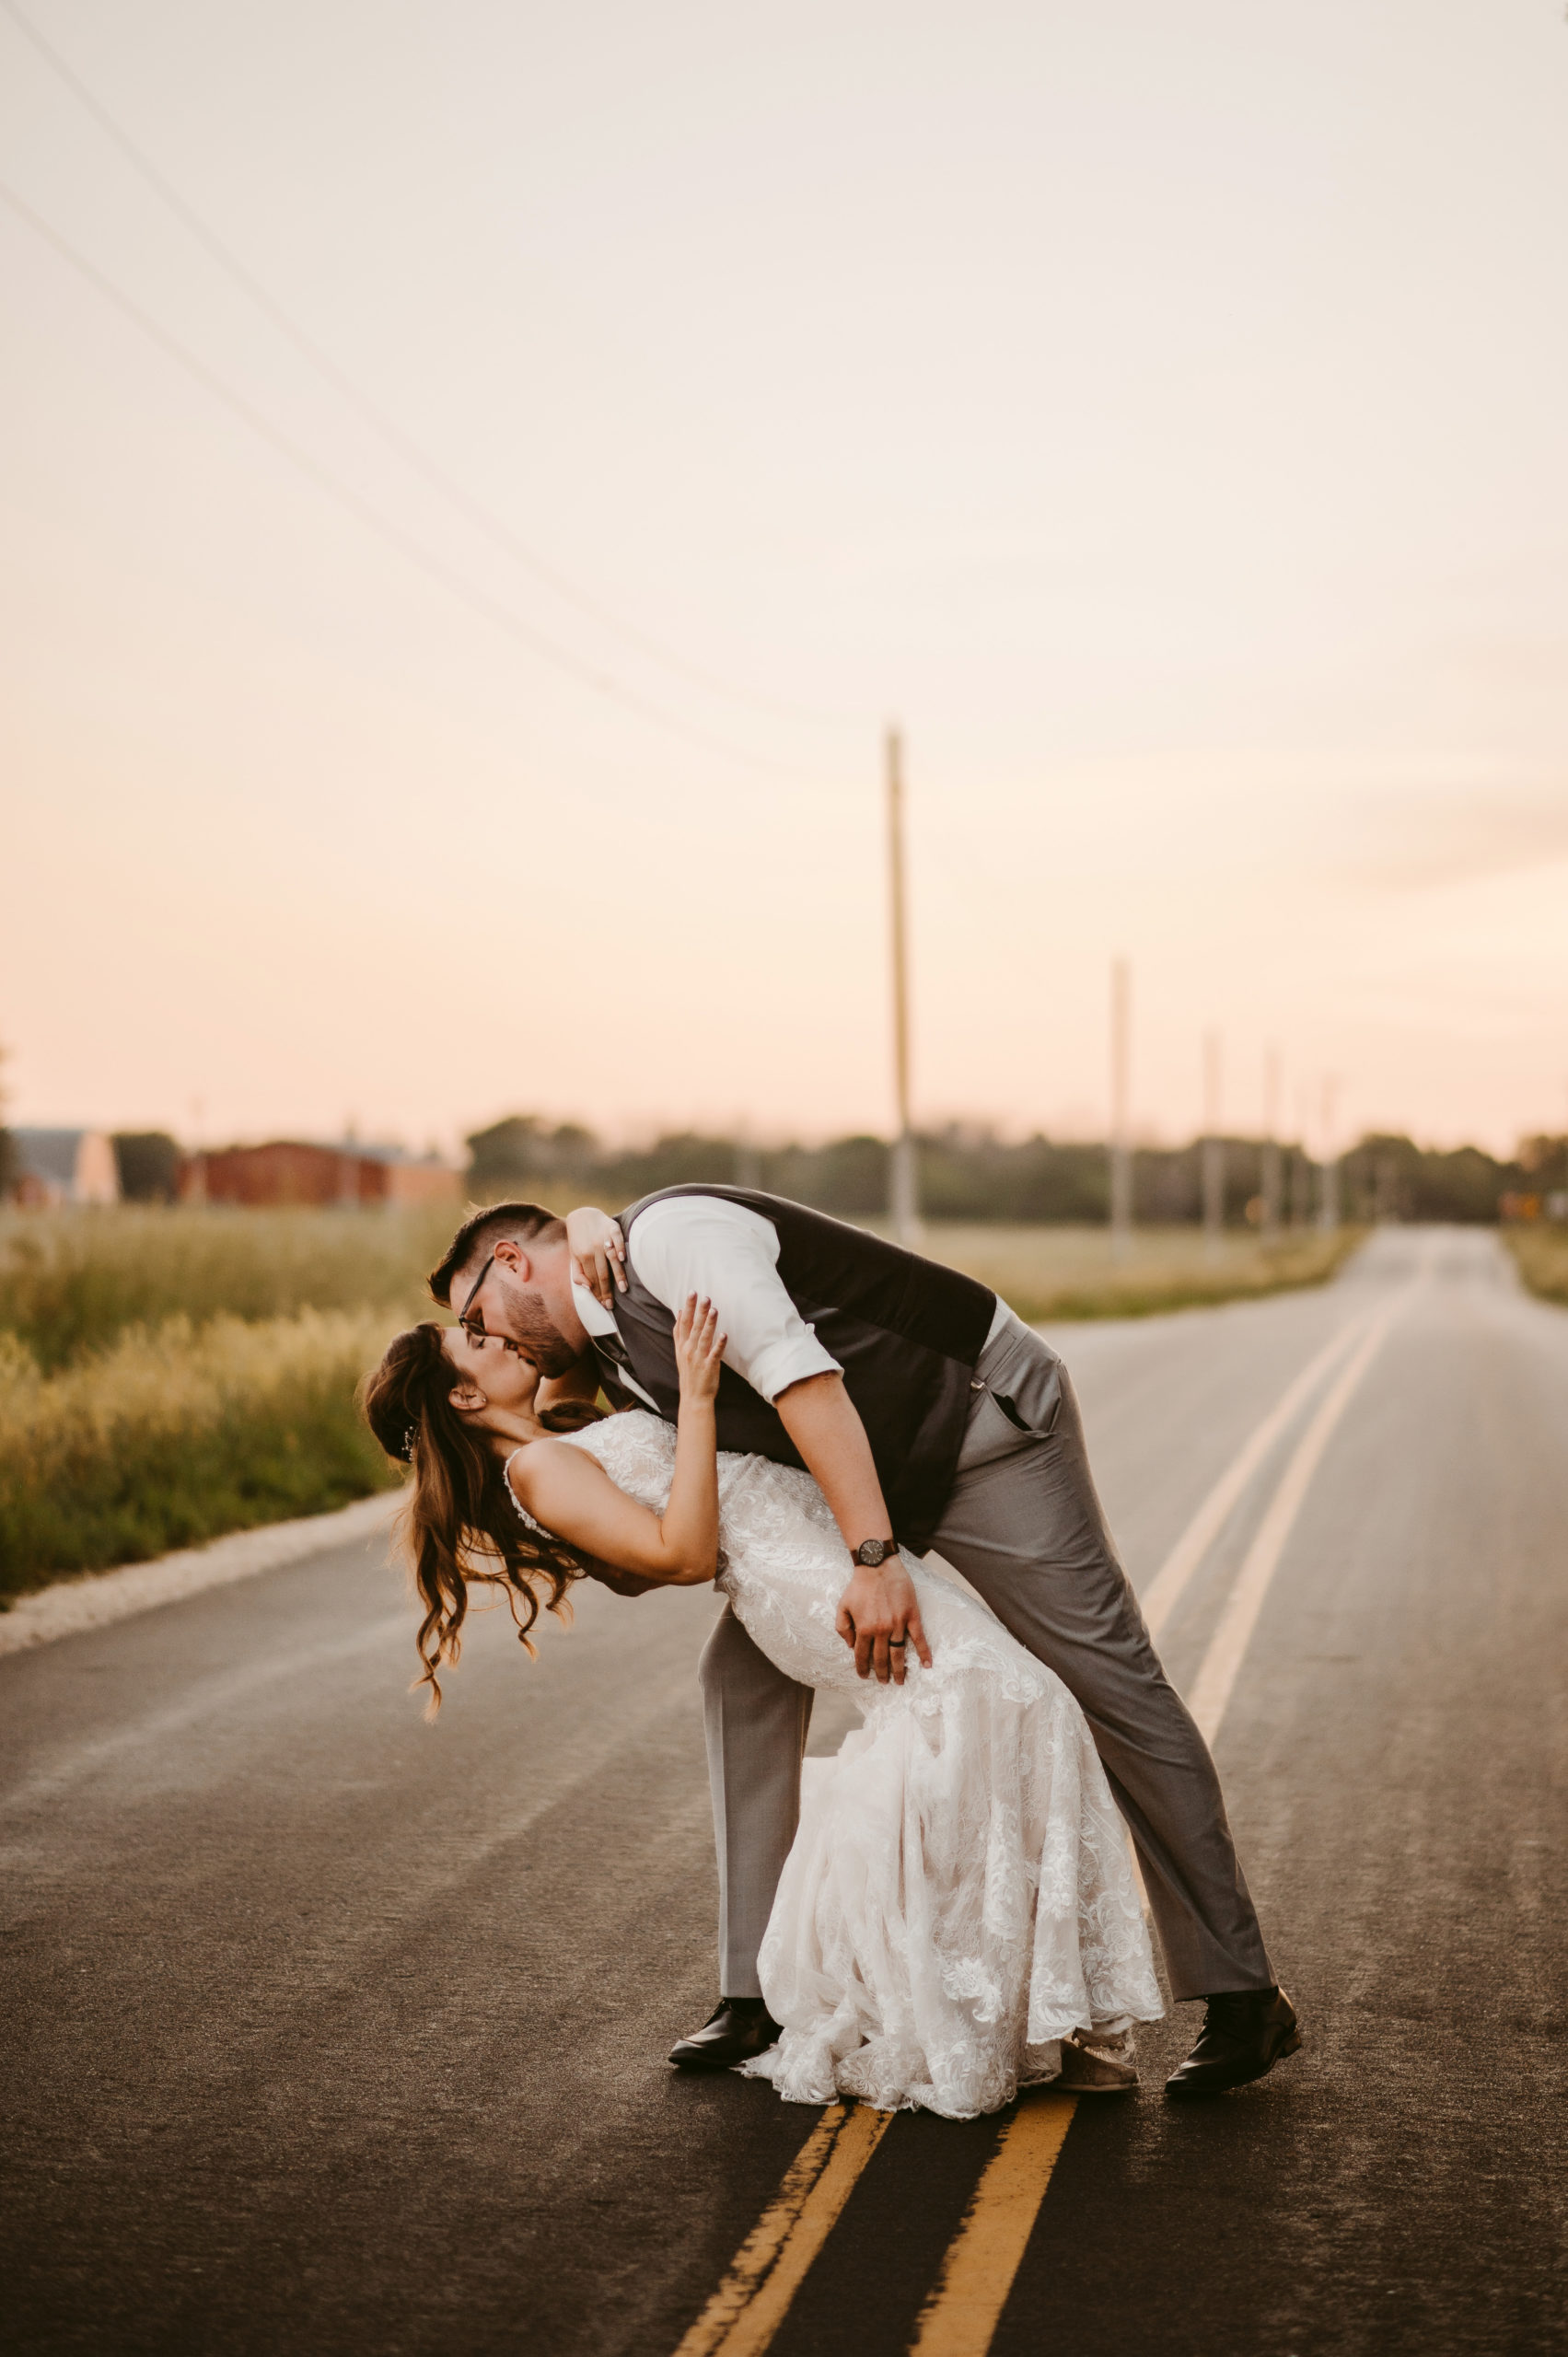 couple in wedding attire standing on a rural road at sunset, man dipping woman and kissing